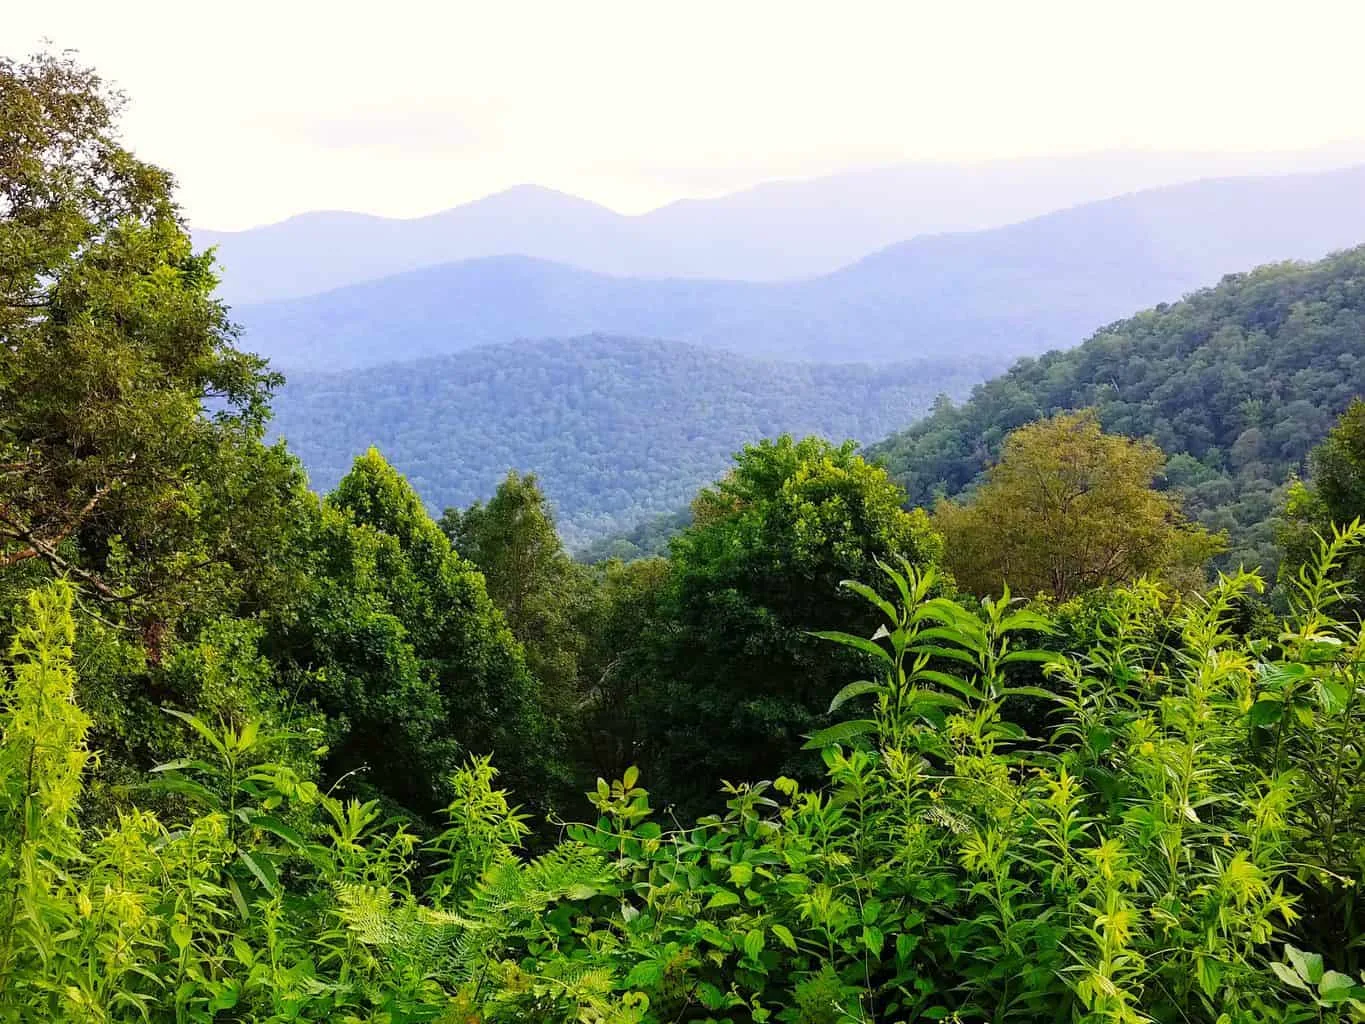 Some of the stunning views that you'll enjoy while hiking around Asheville, North Caroline